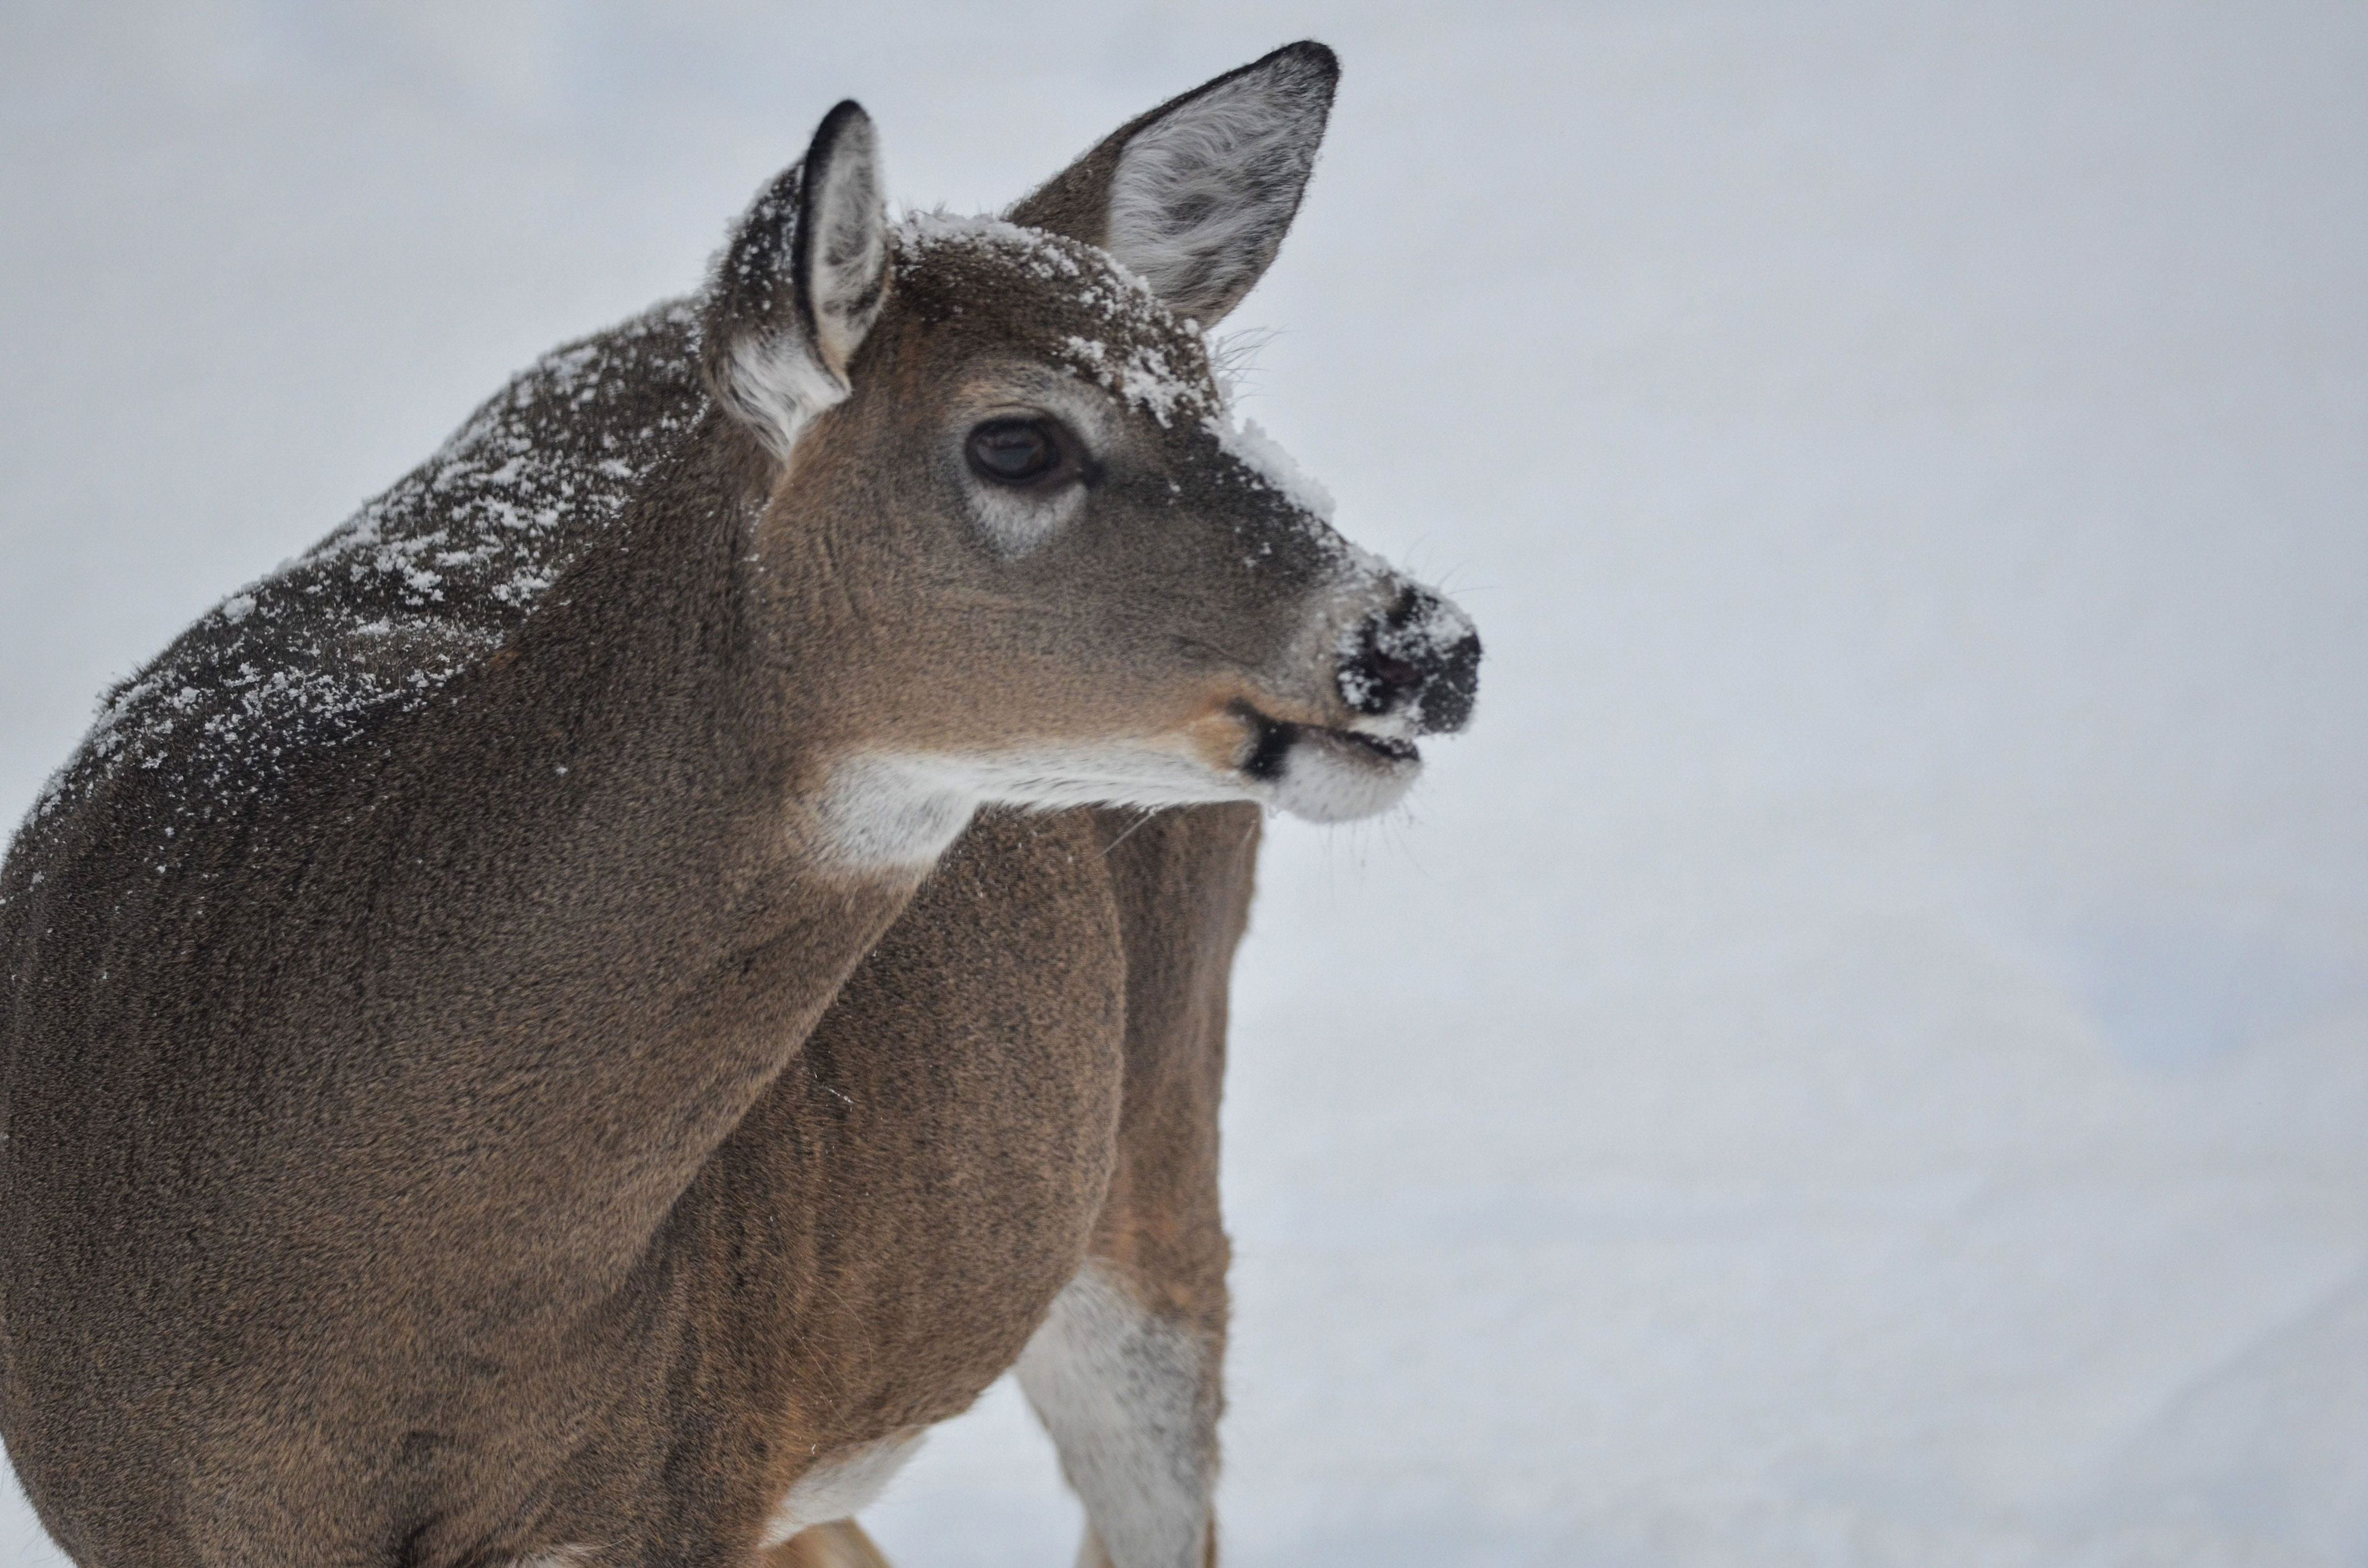 lake county park temporarily closing for deer culling